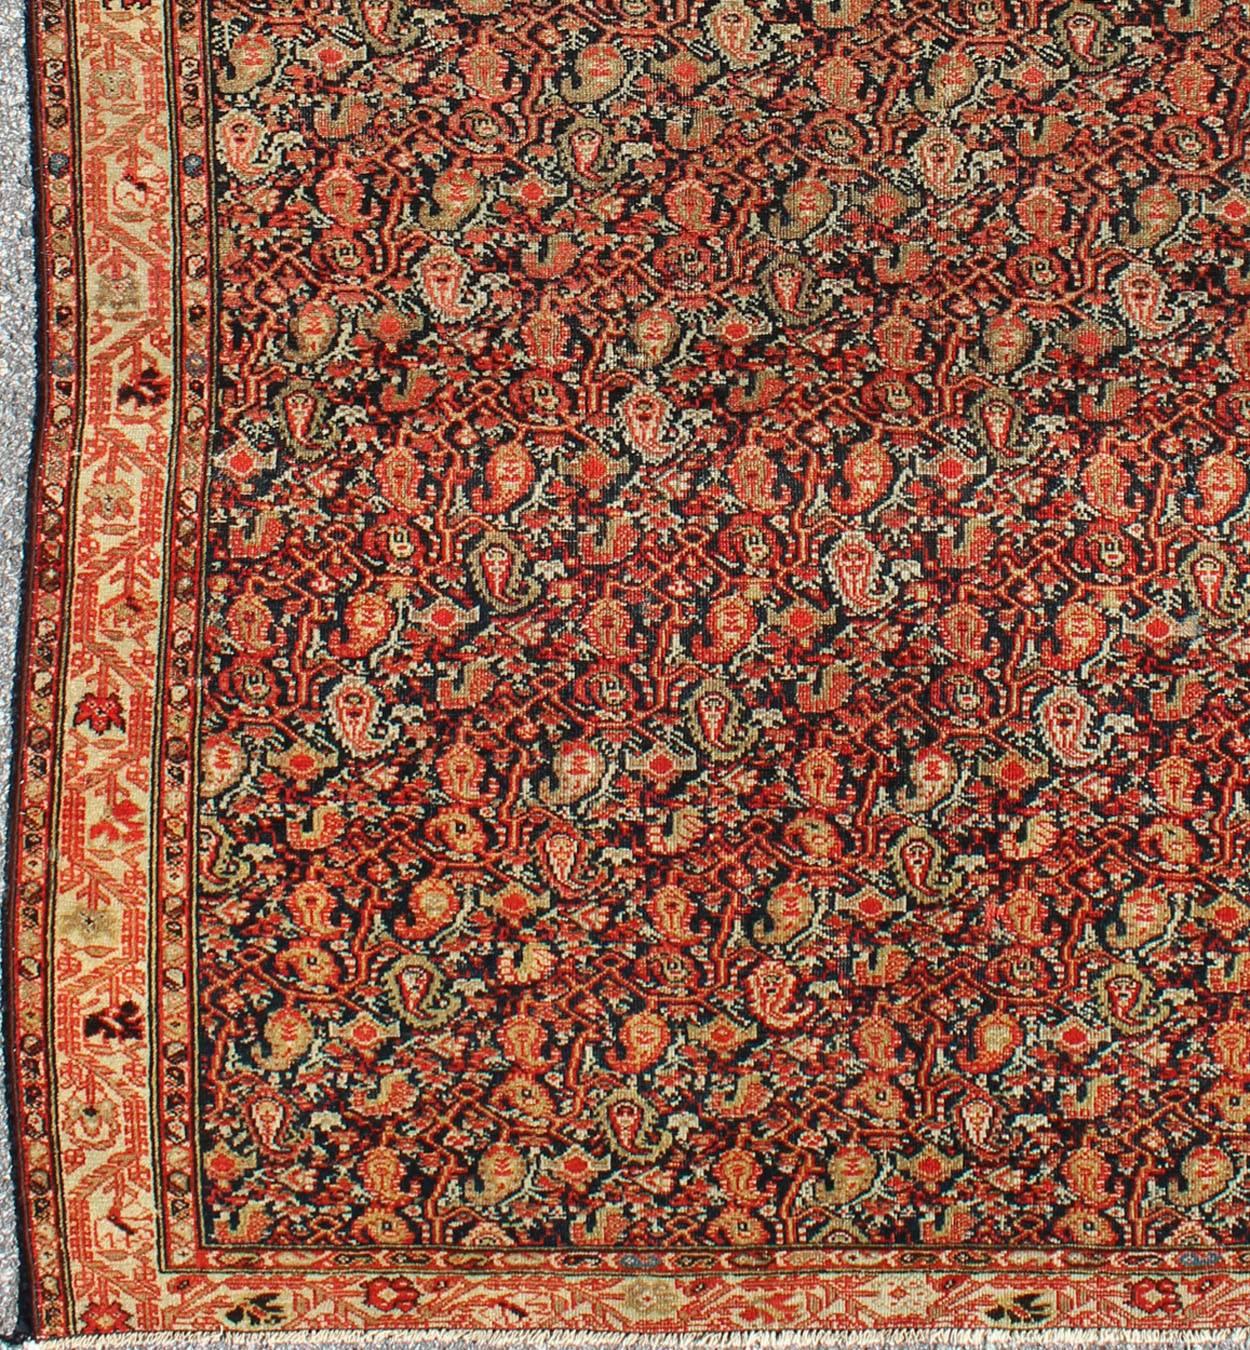 Antique Persian Finely Woven Mishan Malayer Rug rug/J10-0101, country of origin / type: Iran / Mishan Malayer, circa 1880

This amazing, antique Mishan Malayer finely woven Persian rug was handwoven around the fourth quarter of the 19th century and